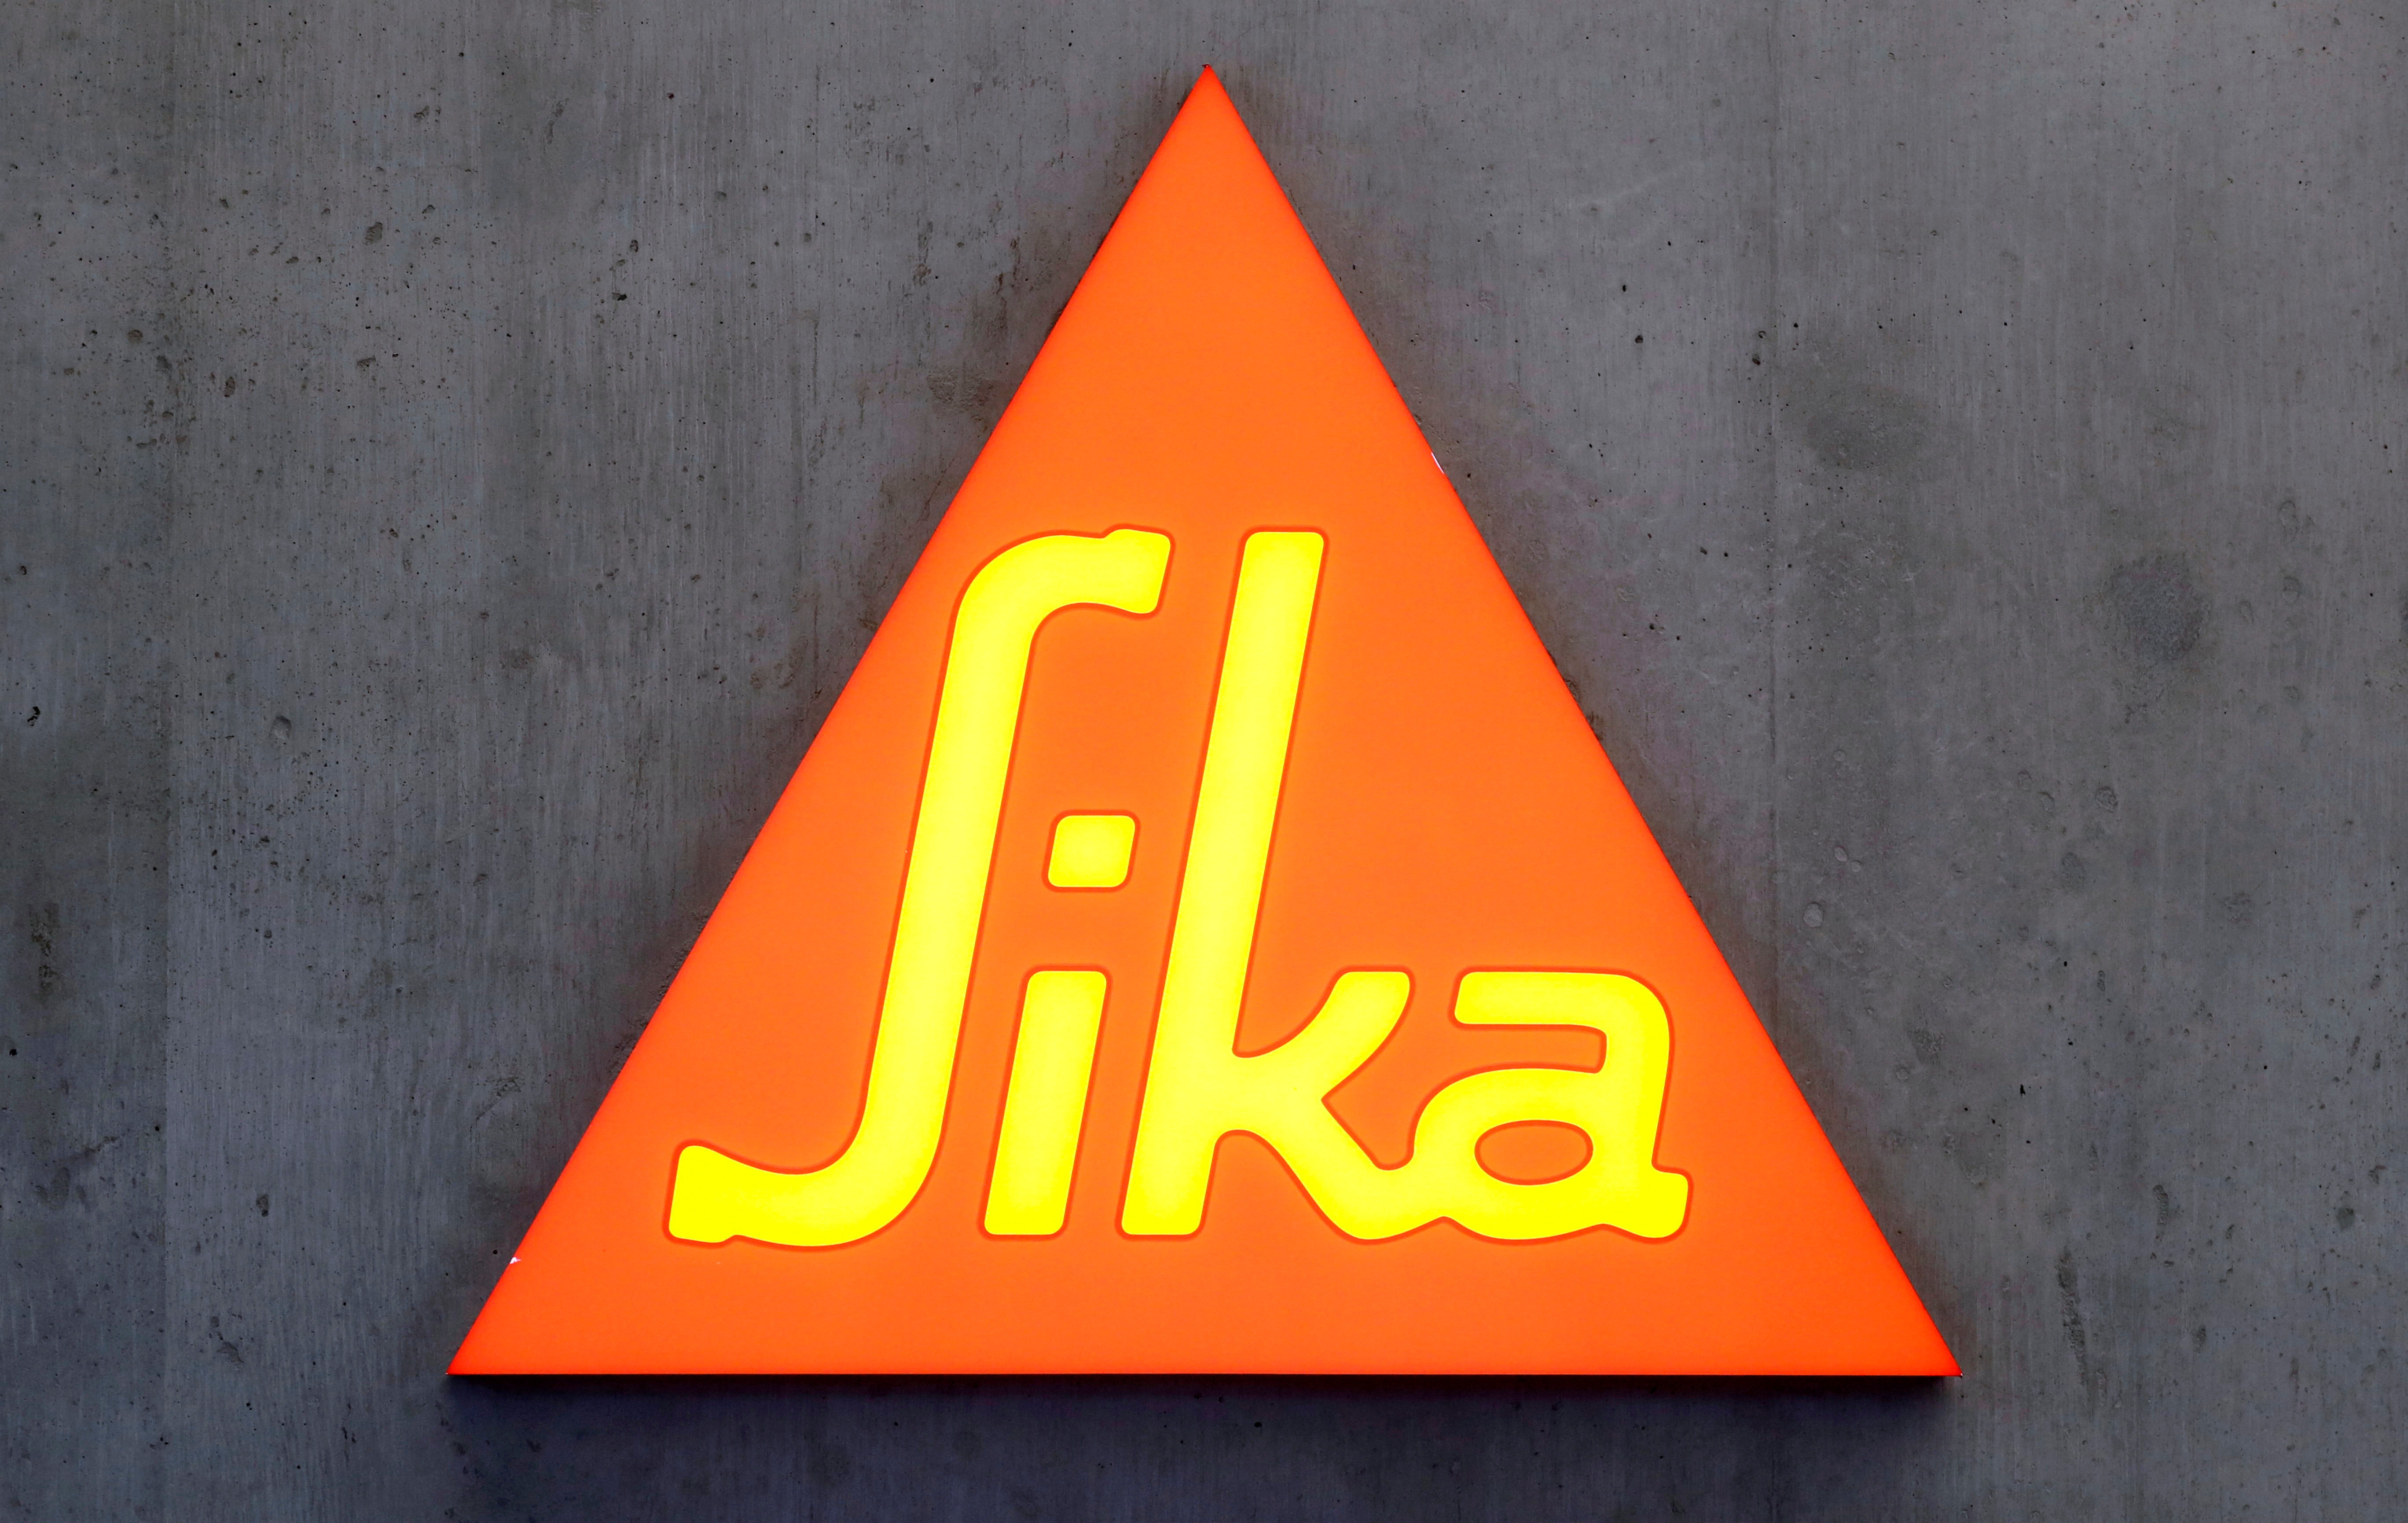 Logo of Swiss chemical group Sika is seen in Zurich